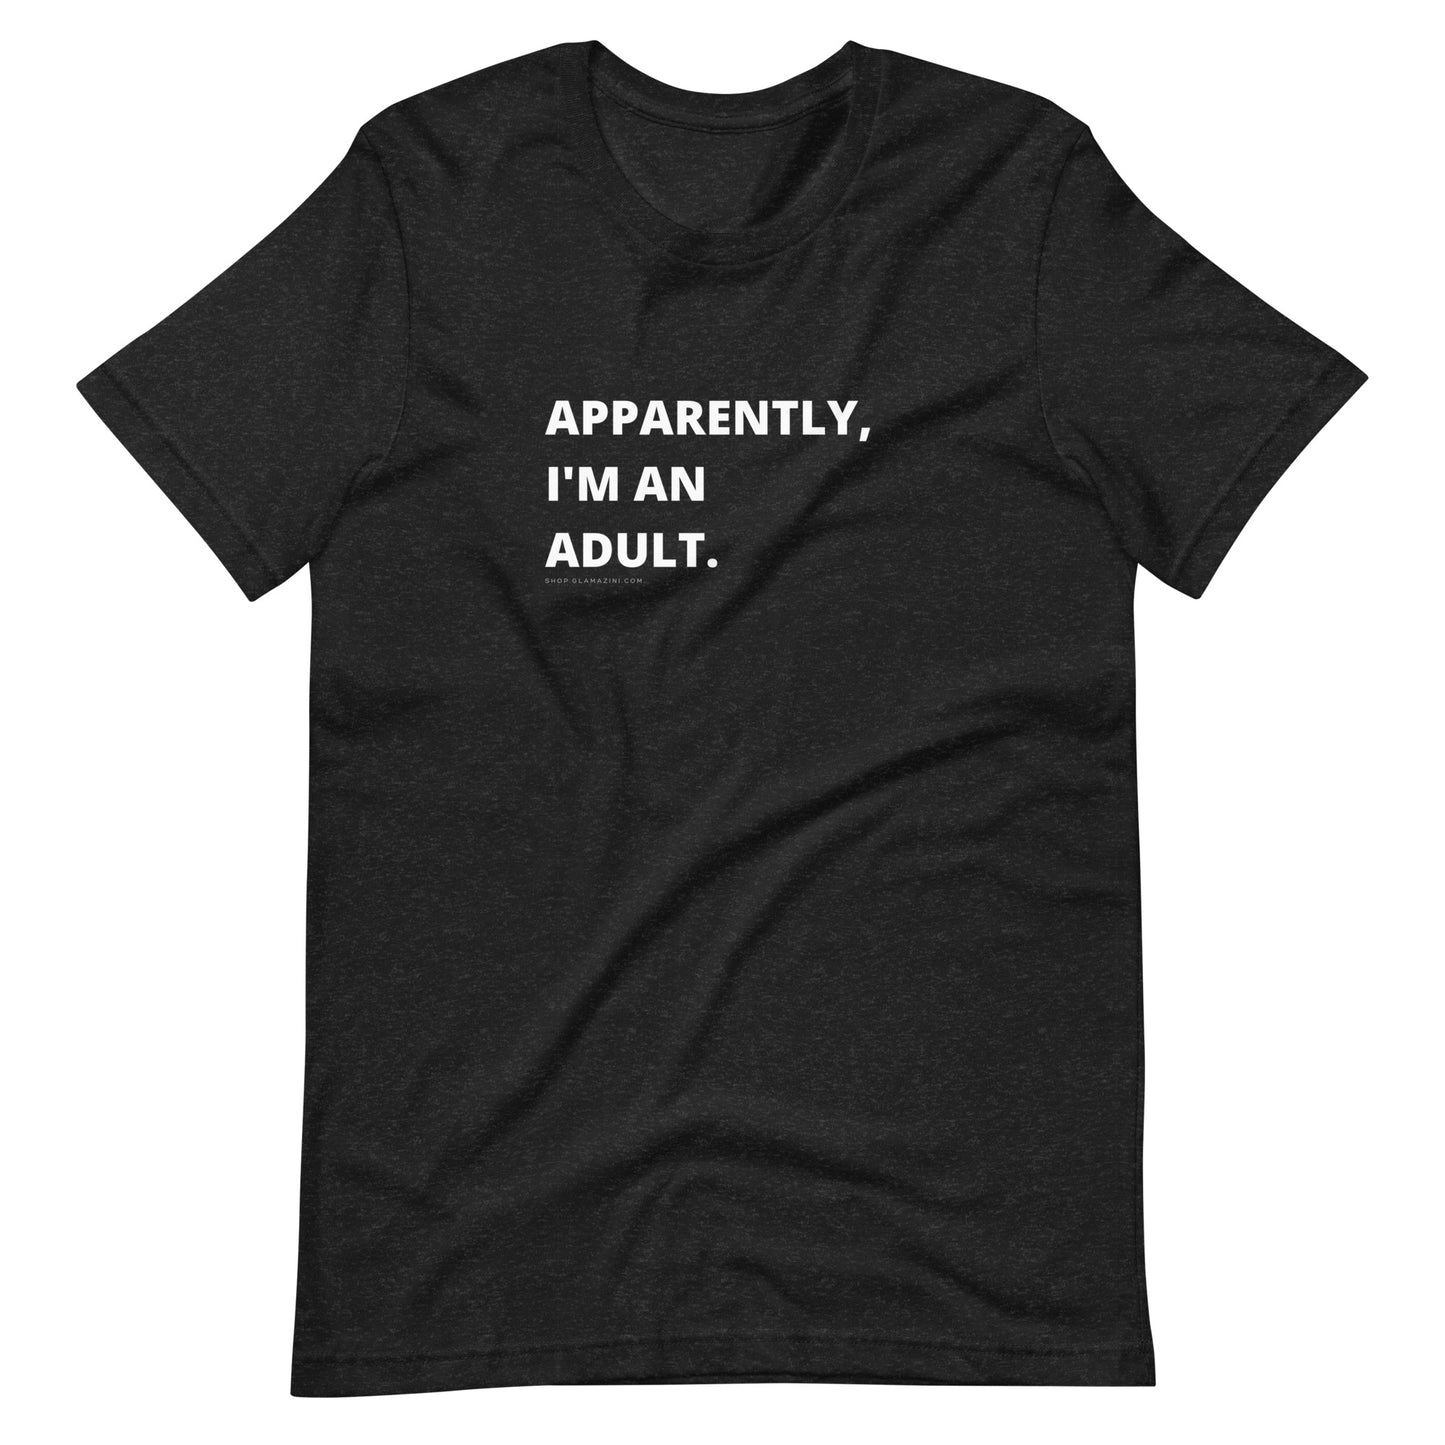 apparently, I'm an adult. unisex tee